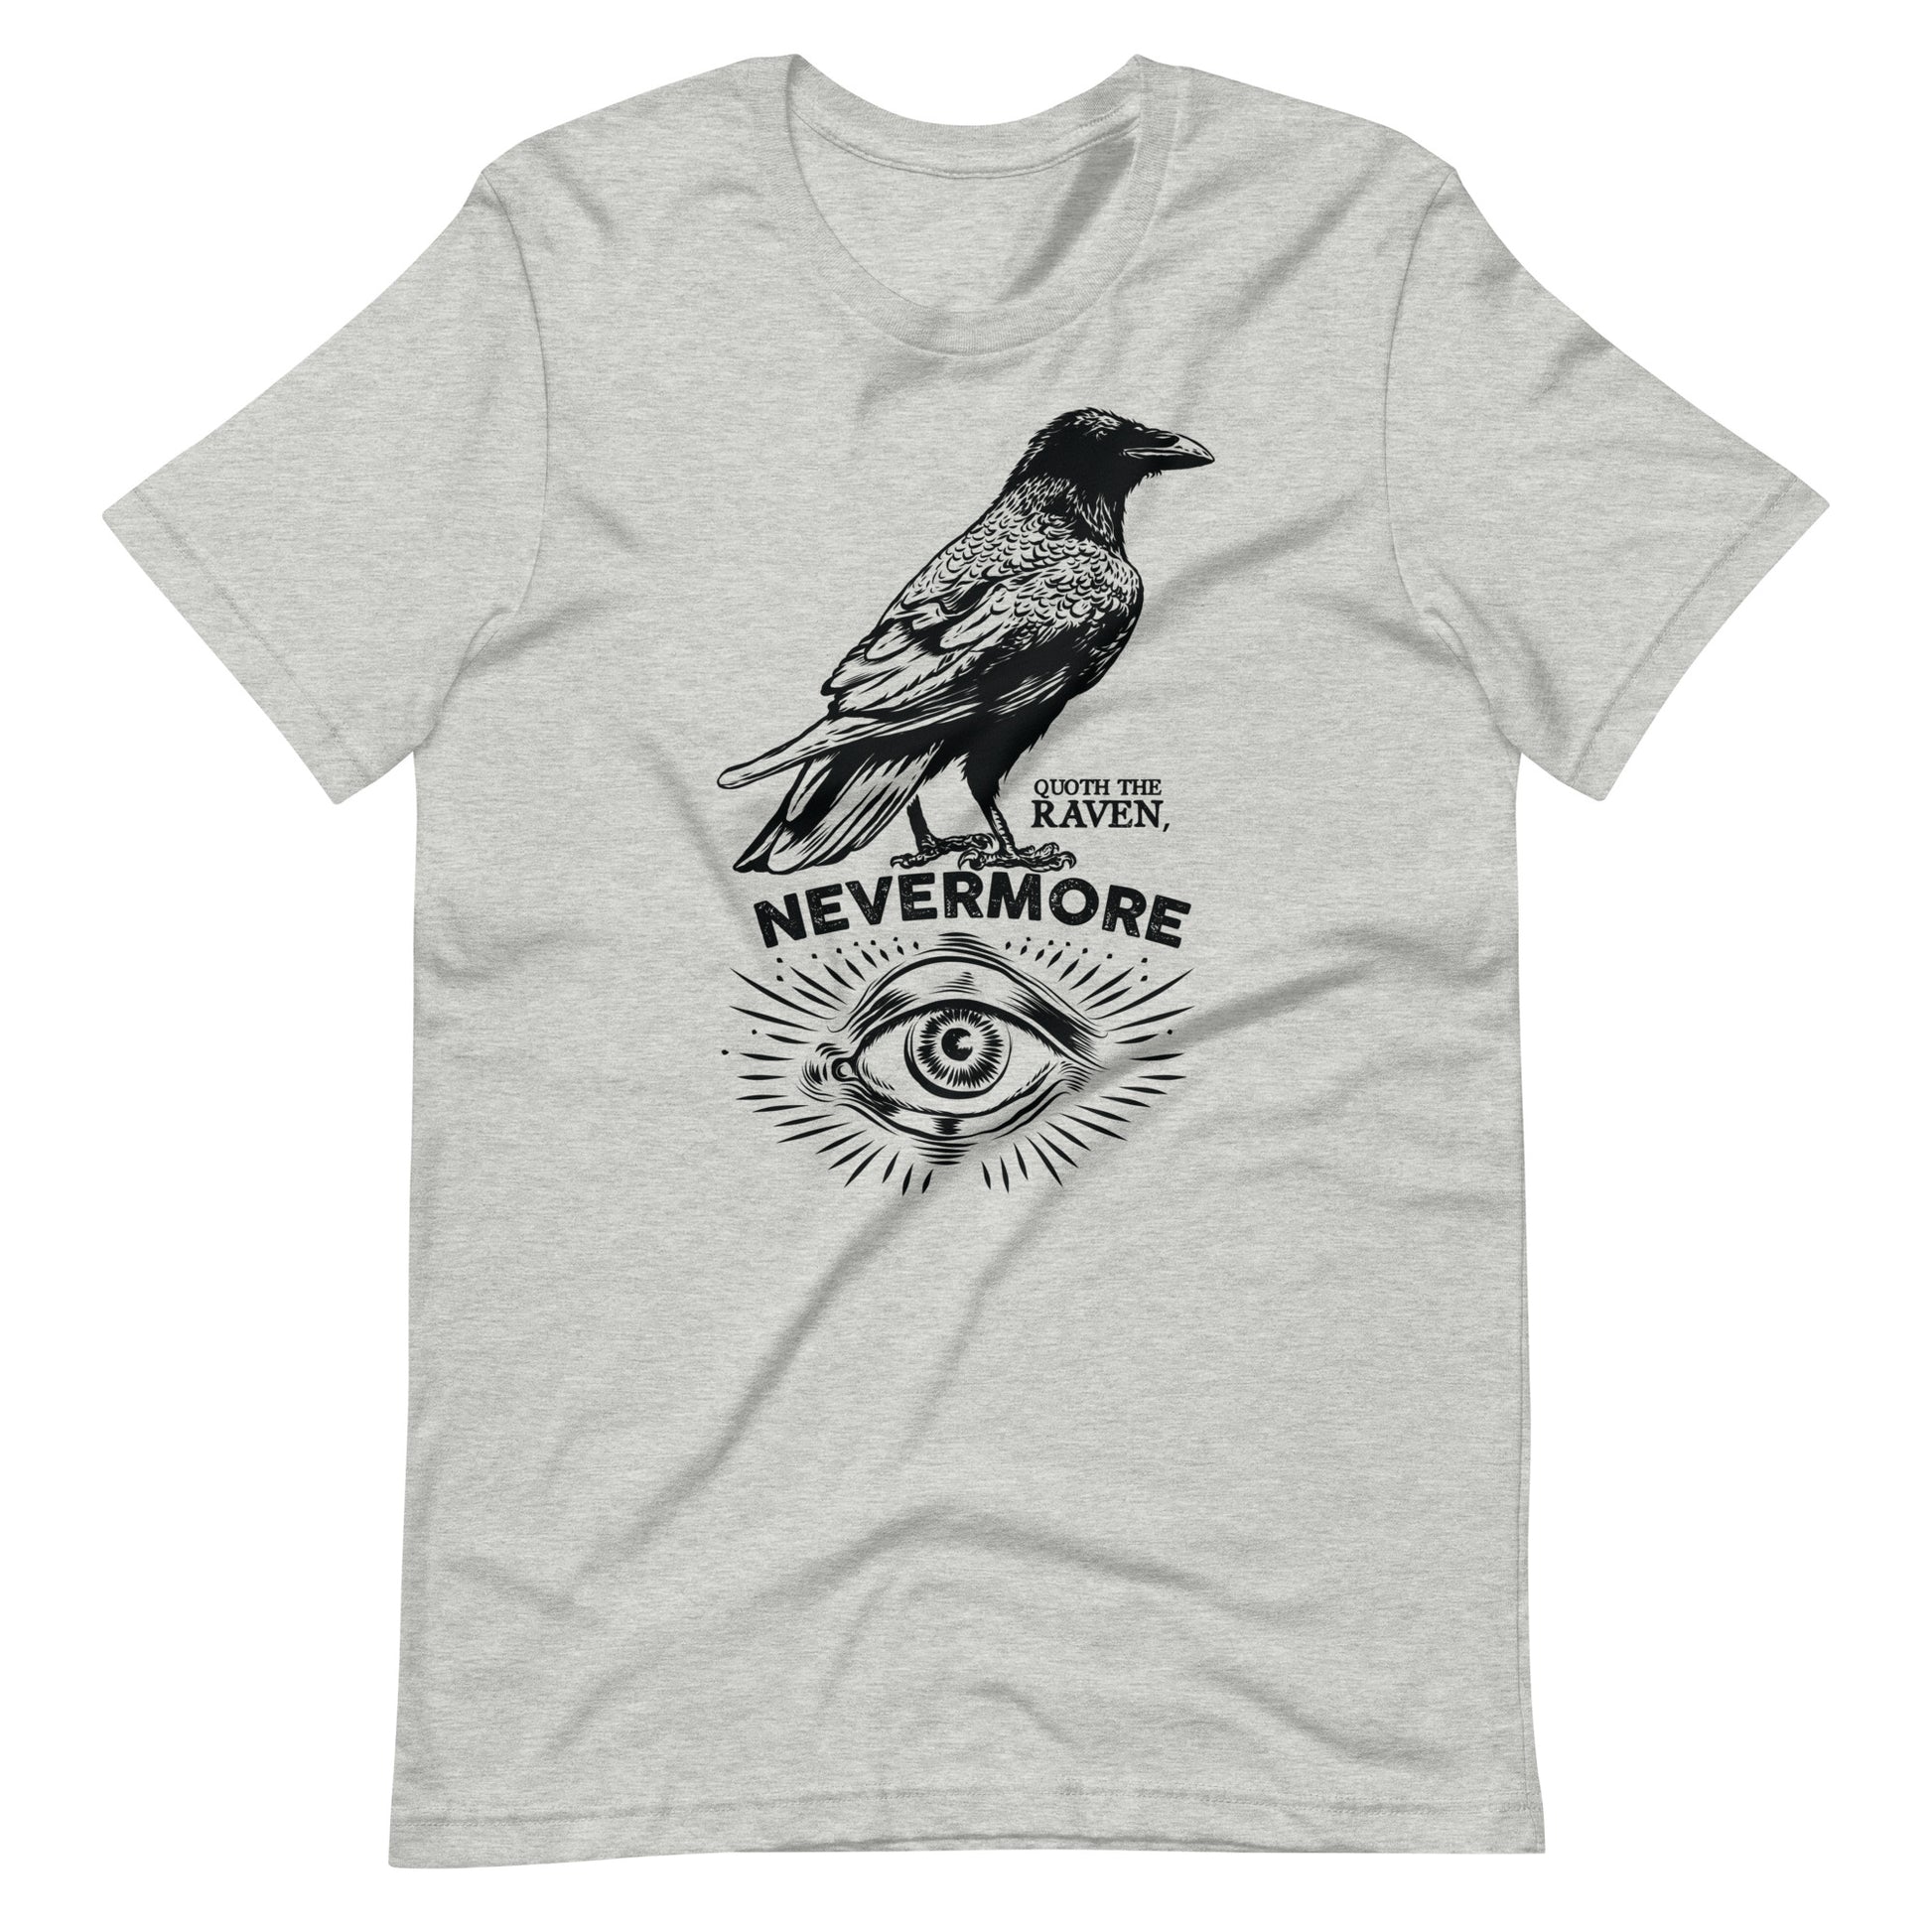 Quoth the Raven Nevermore - Men's t-shirt - Athletic Heather Front